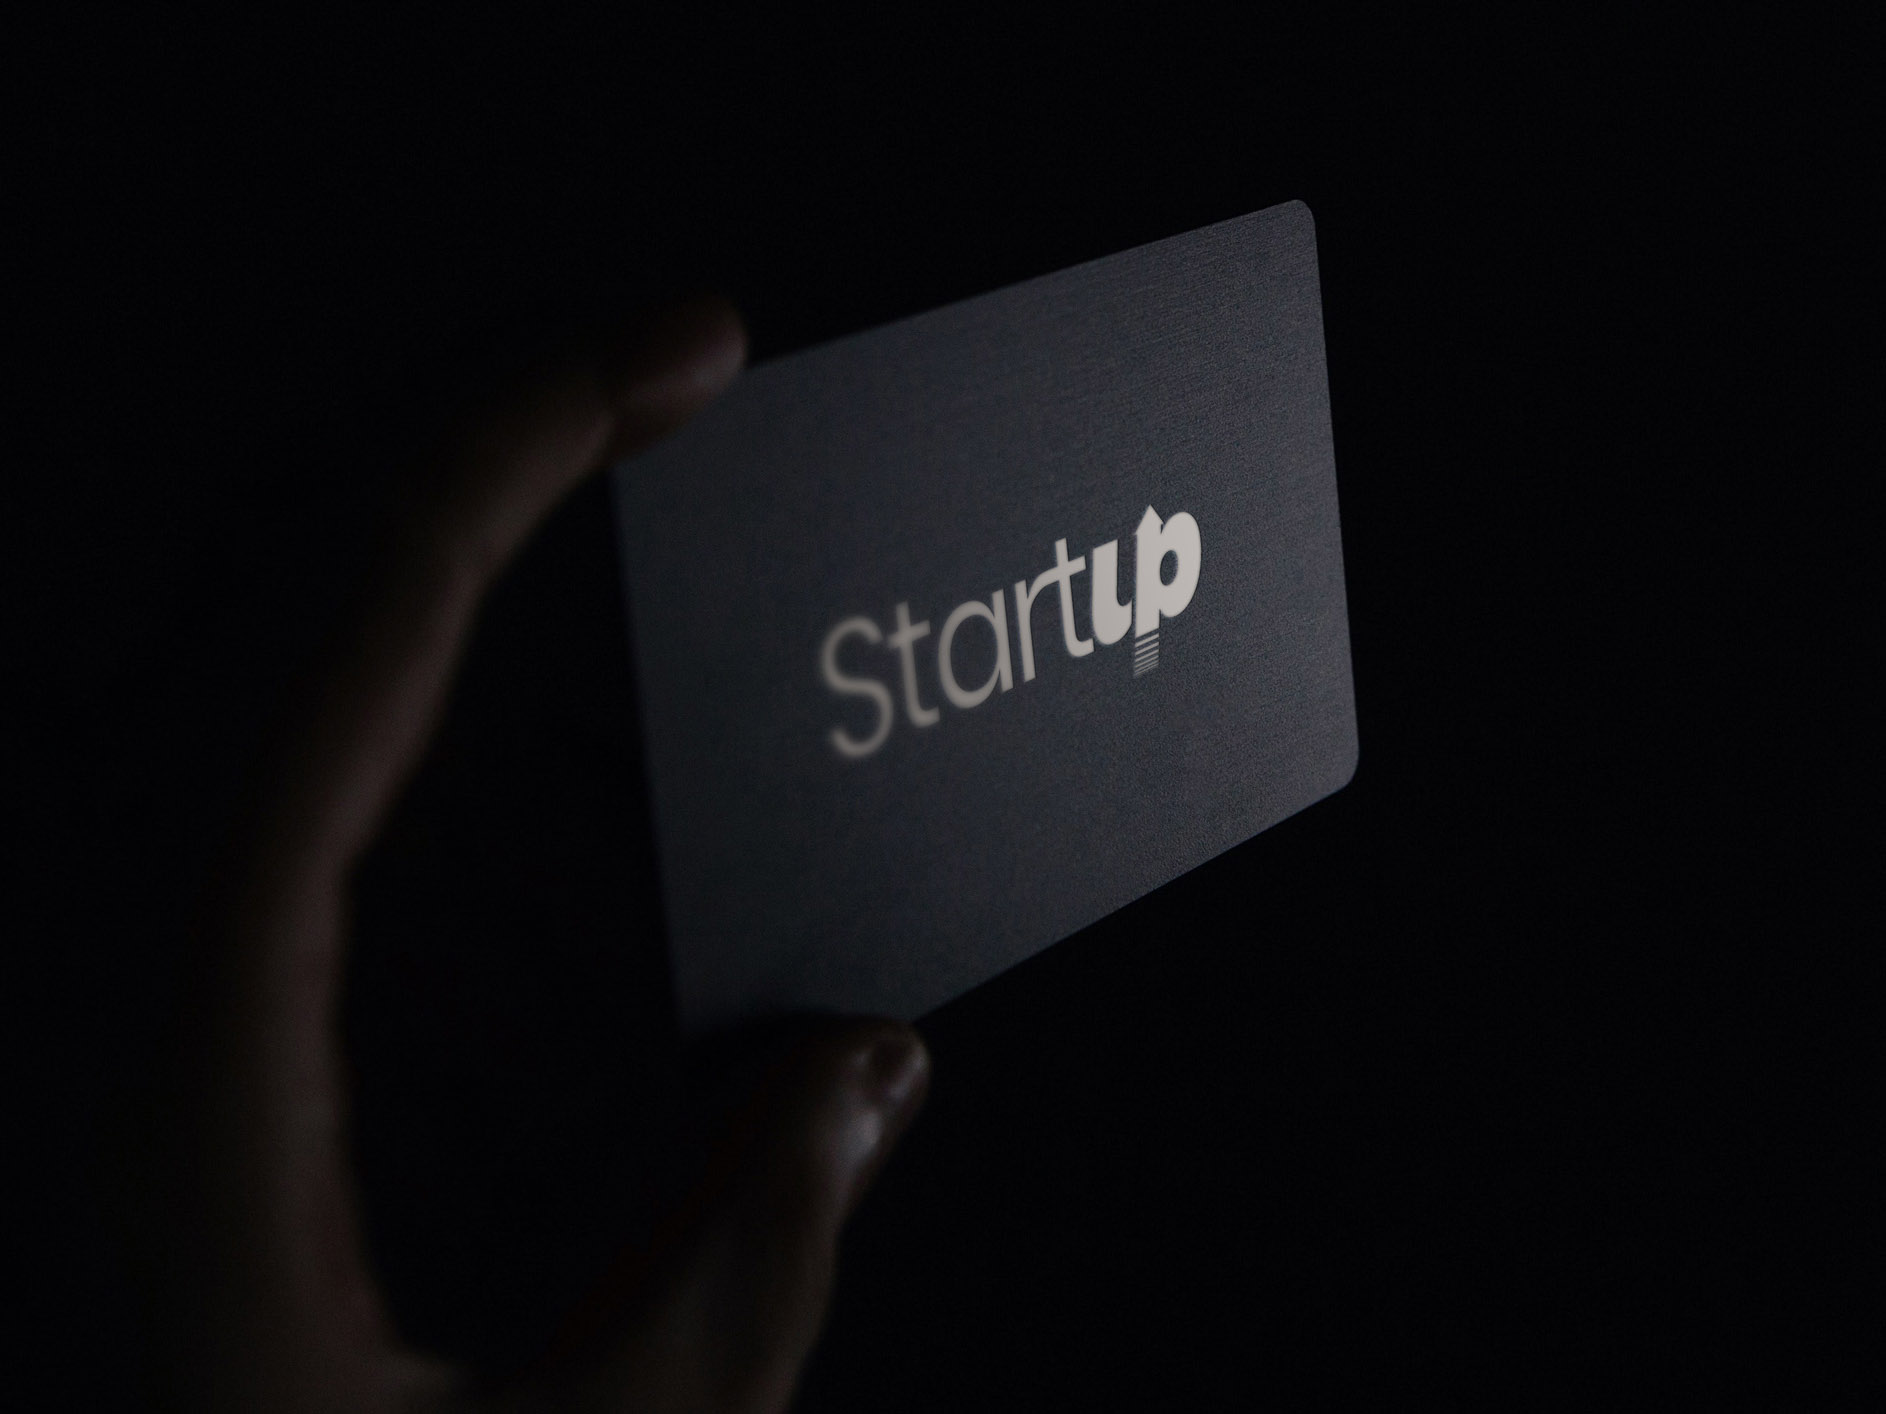 How the Startup brand will look when used on a business card